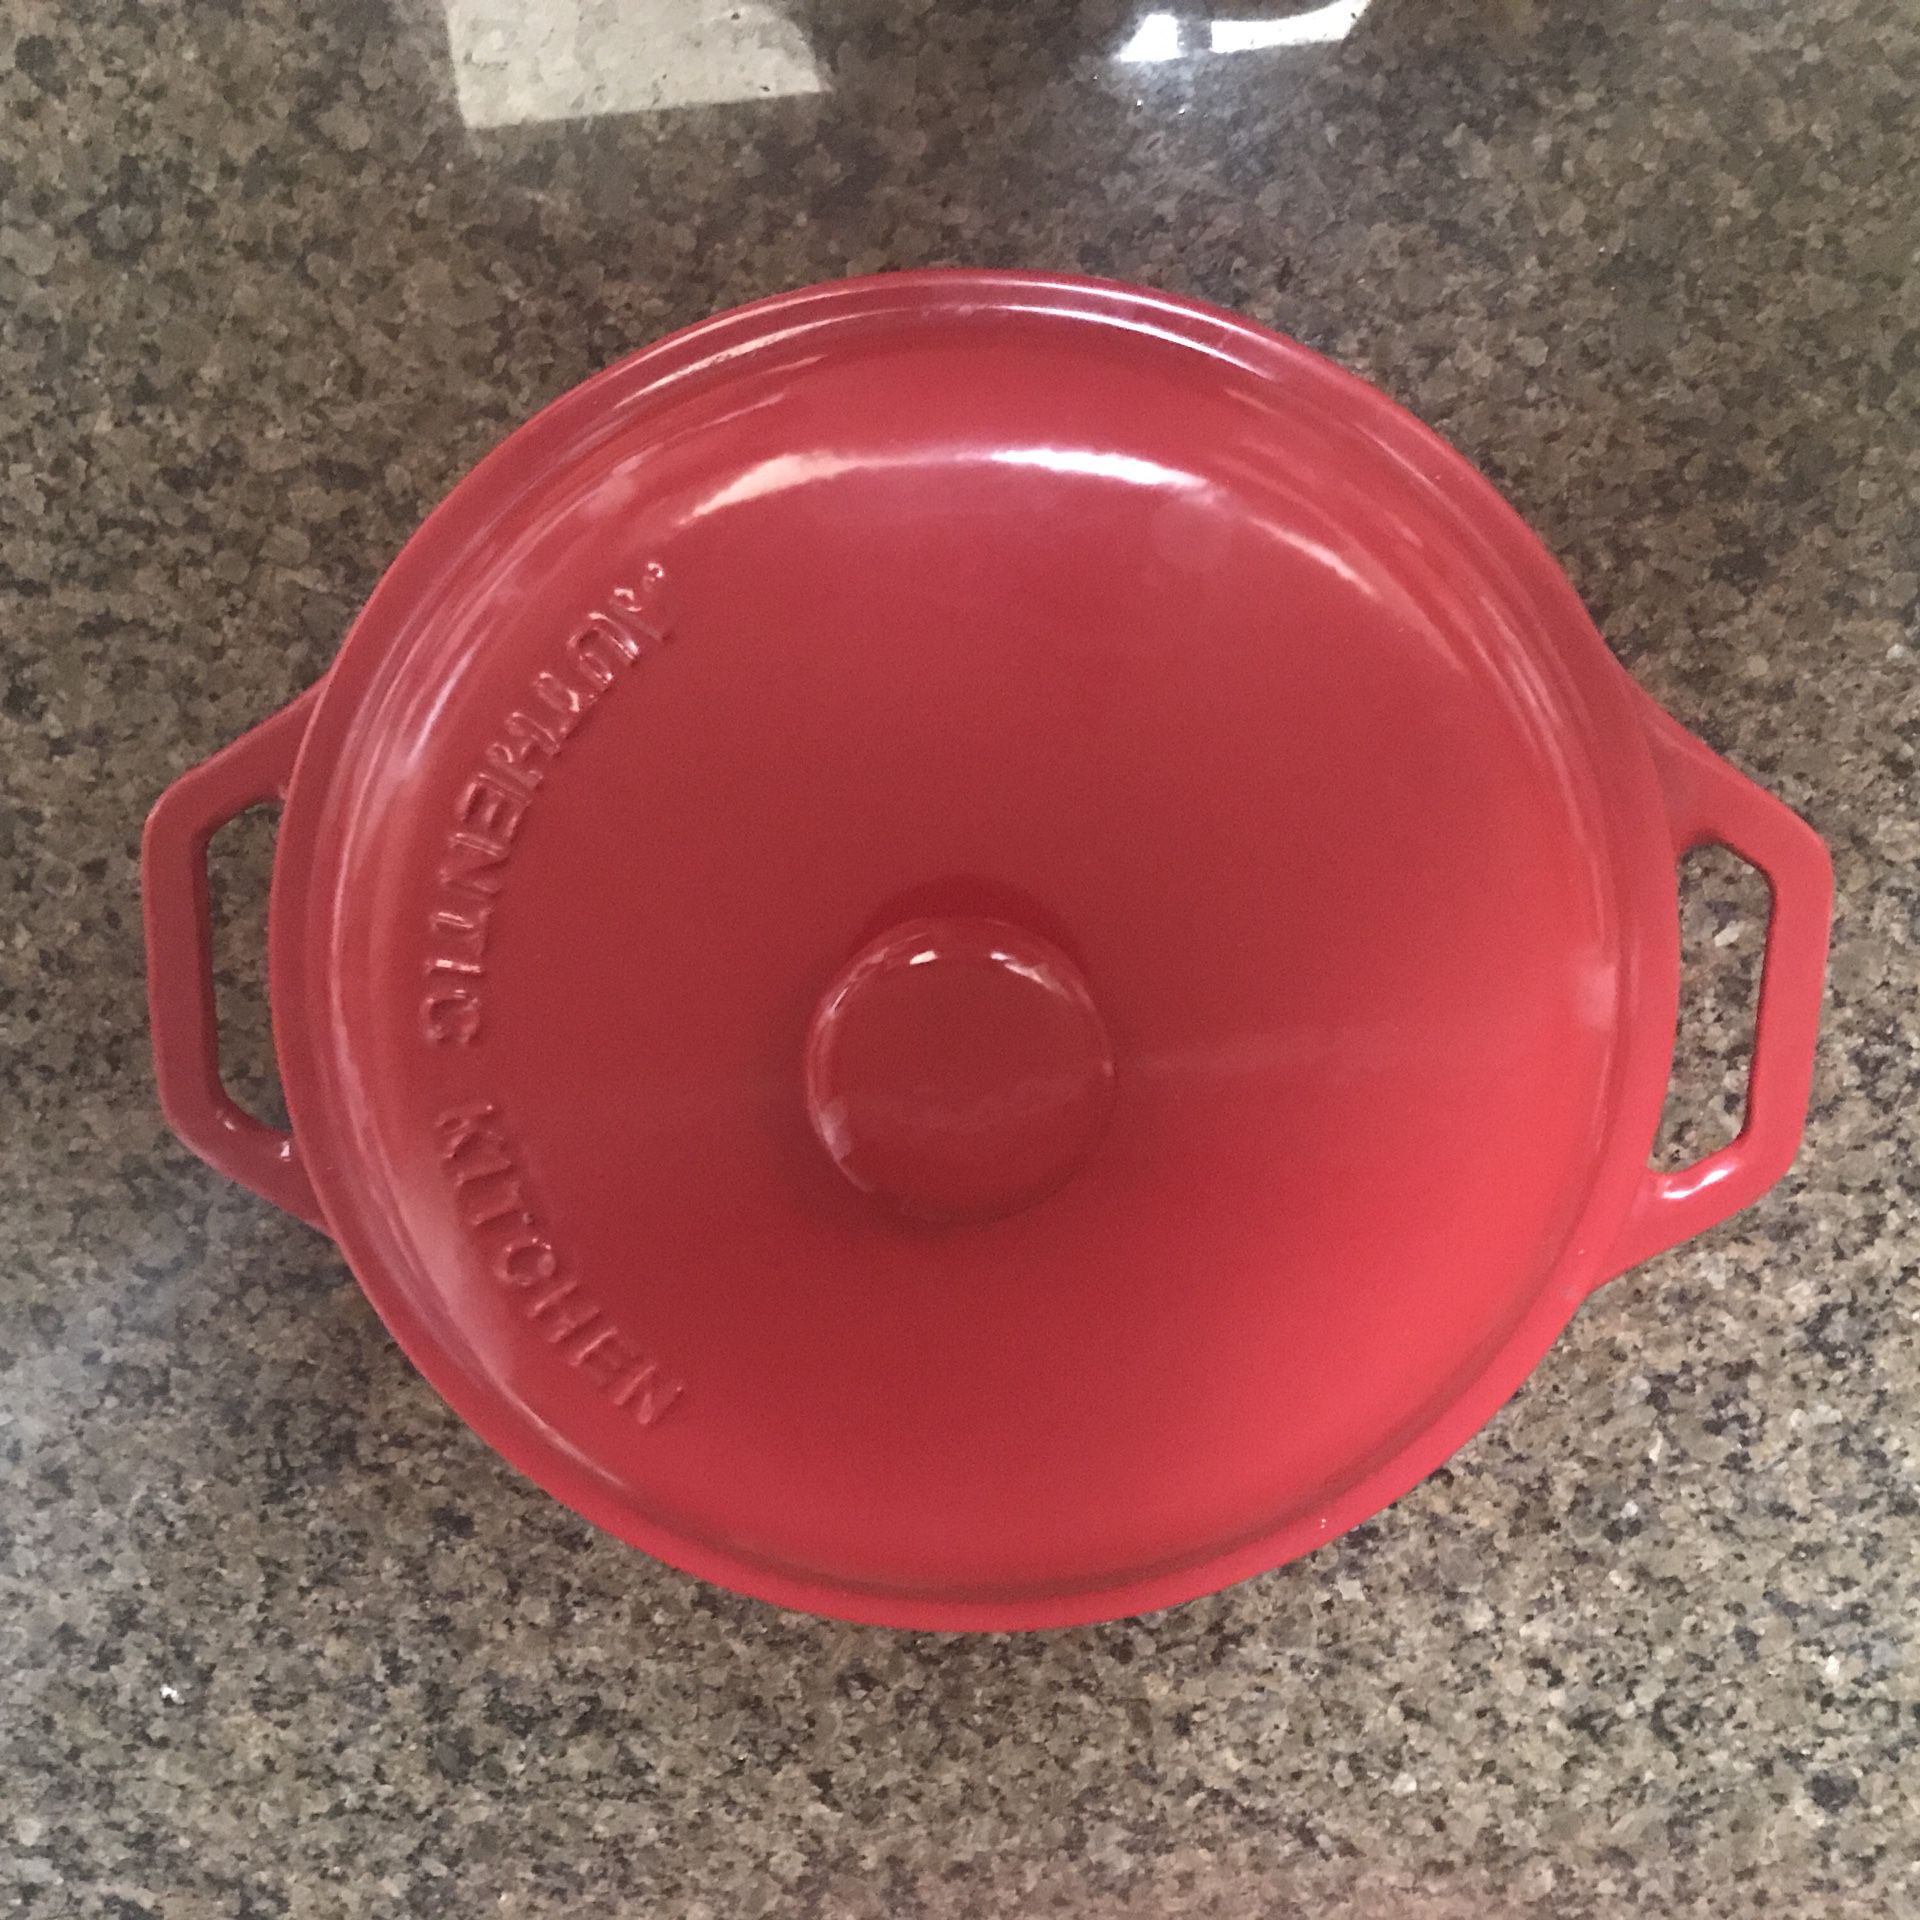 Lodge 12” 6 QT Cast Iron Dutch Oven Made in USA for Sale in Riverside, CA -  OfferUp